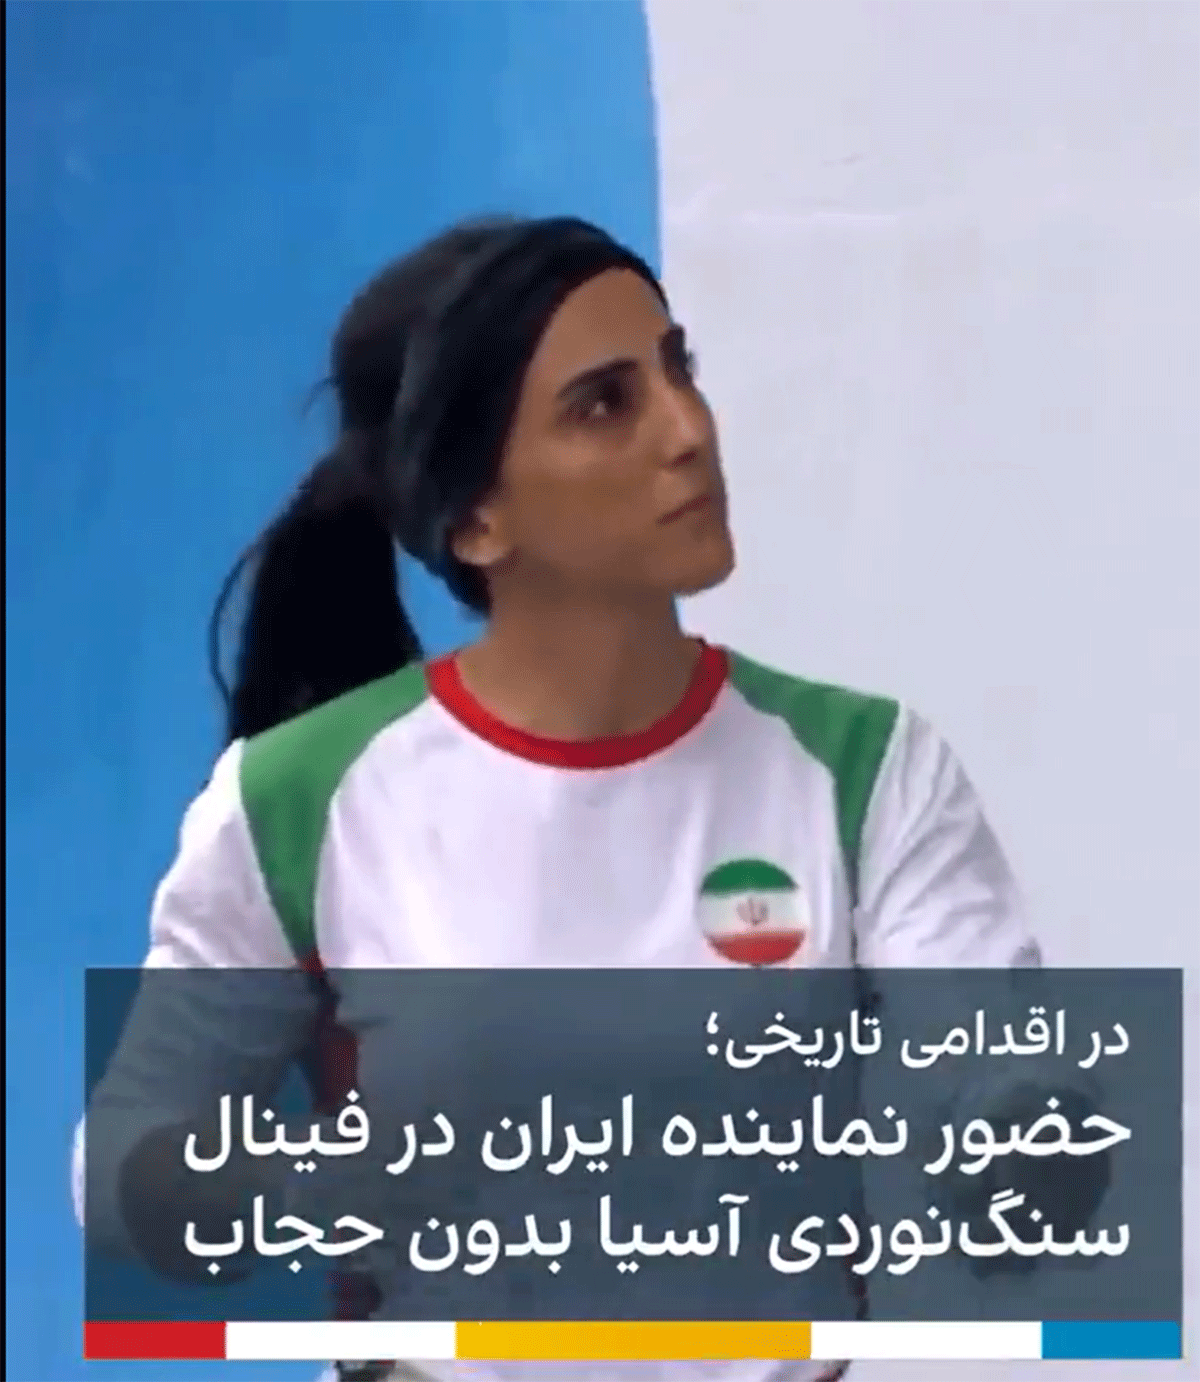 Iranian rock climber Elnaz Rekabi had competed in the Asian Climbing Competition in Seoul without a headscarf. She said in a statement on Instagram that it was 'unintentional'